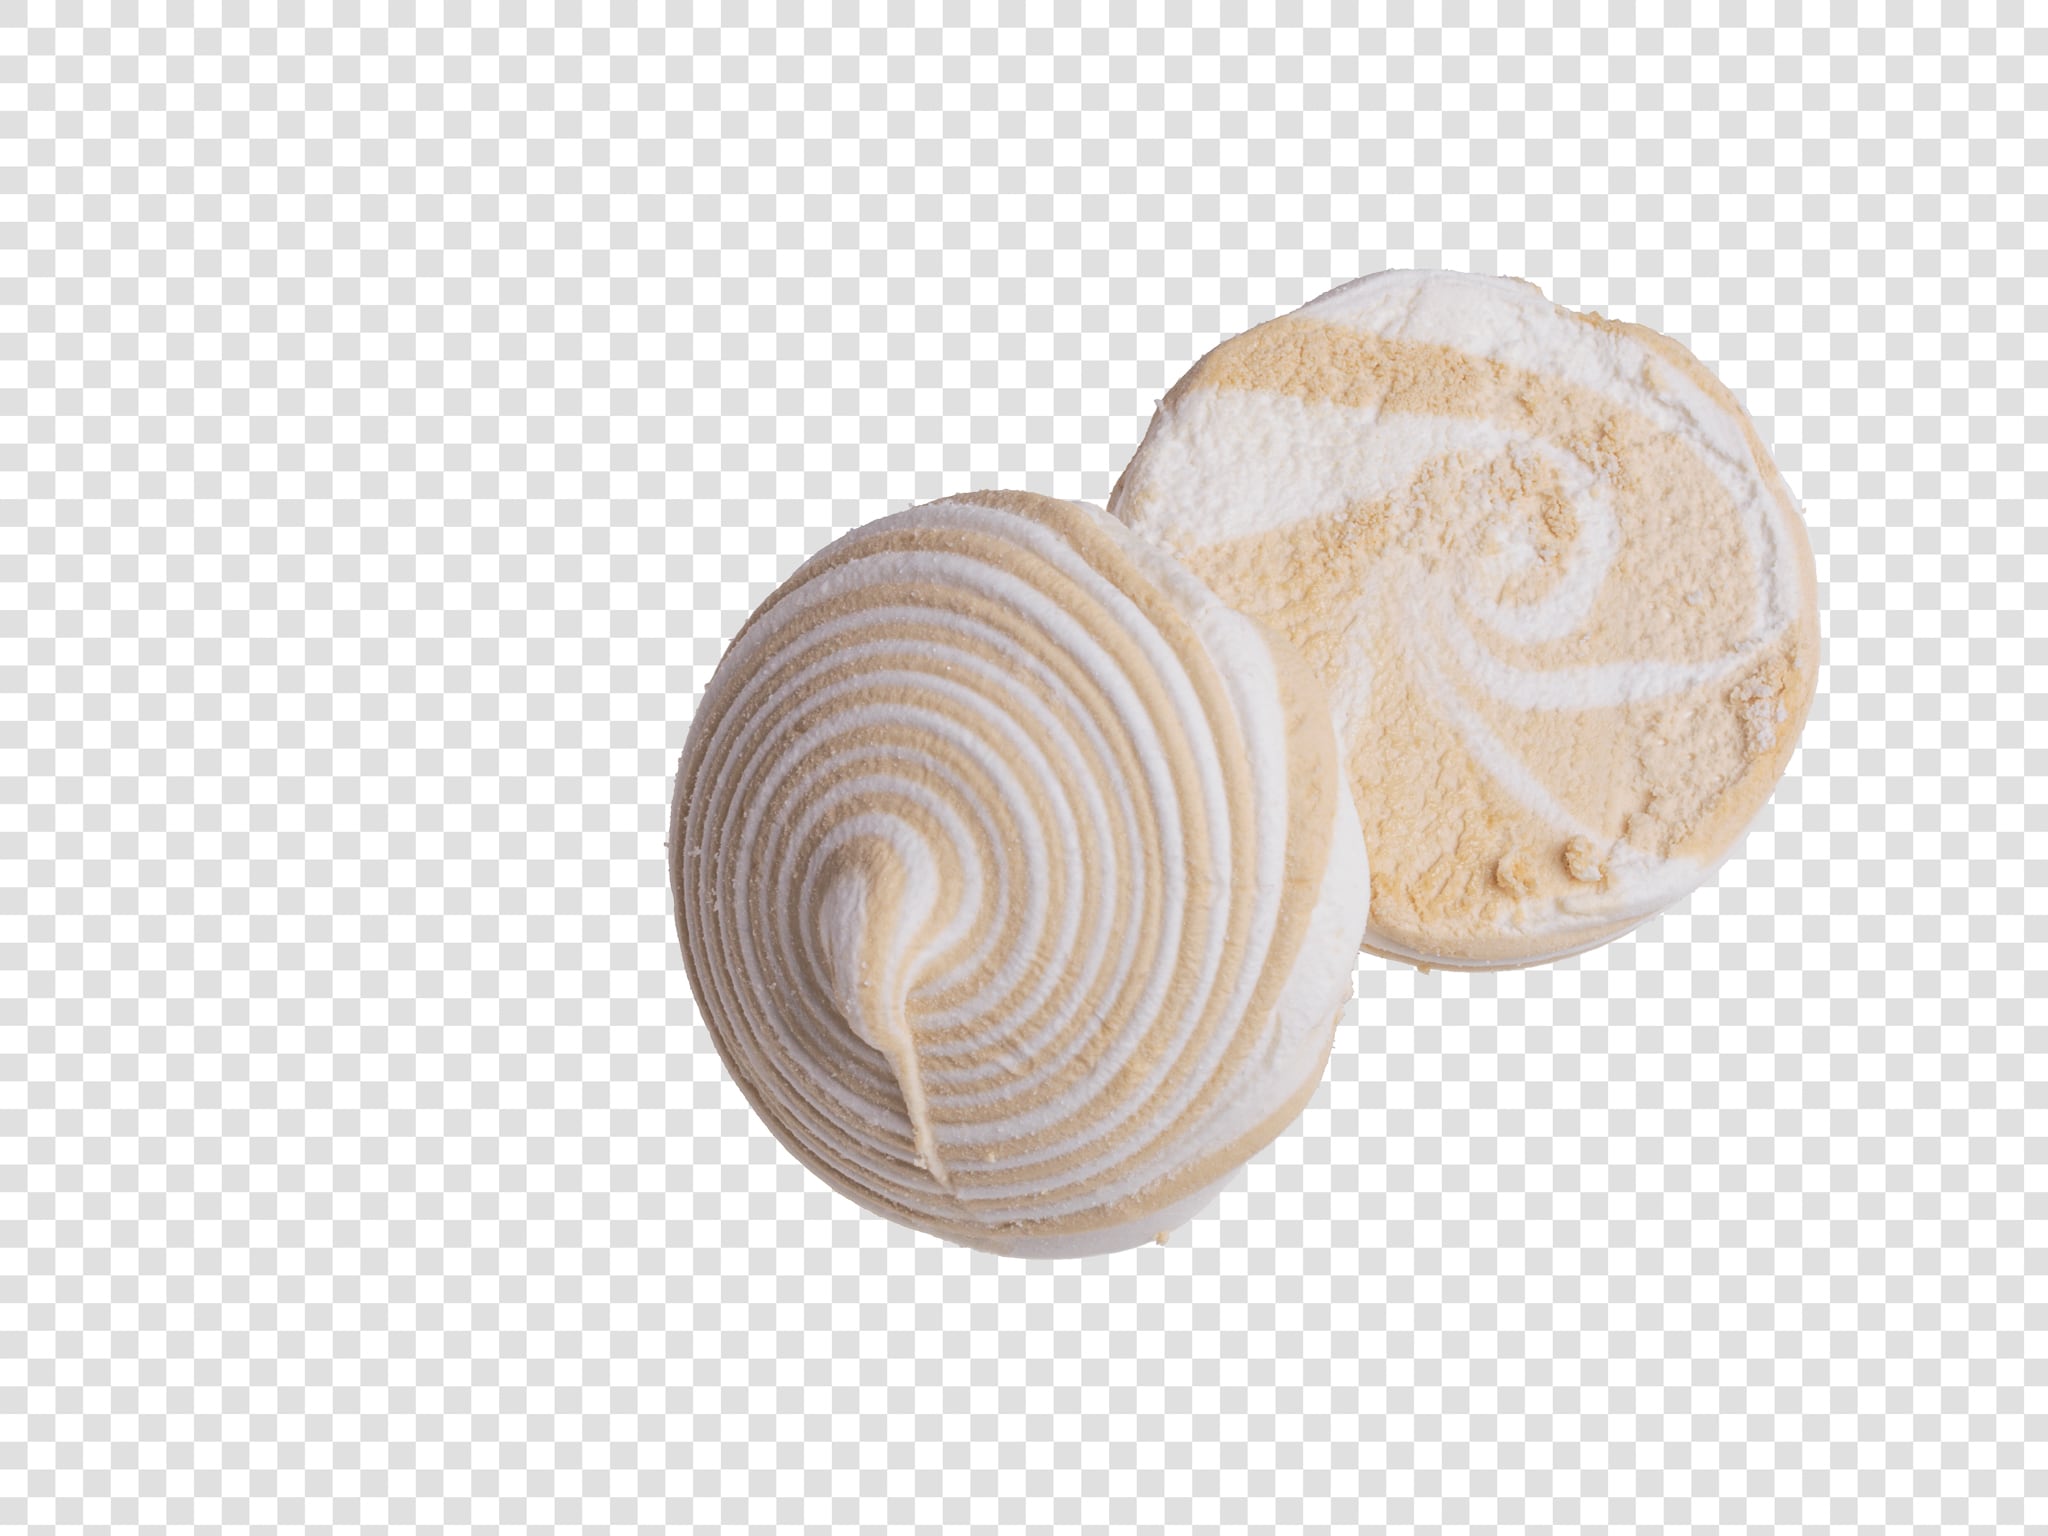 Marshmallow PSD image with transparent background